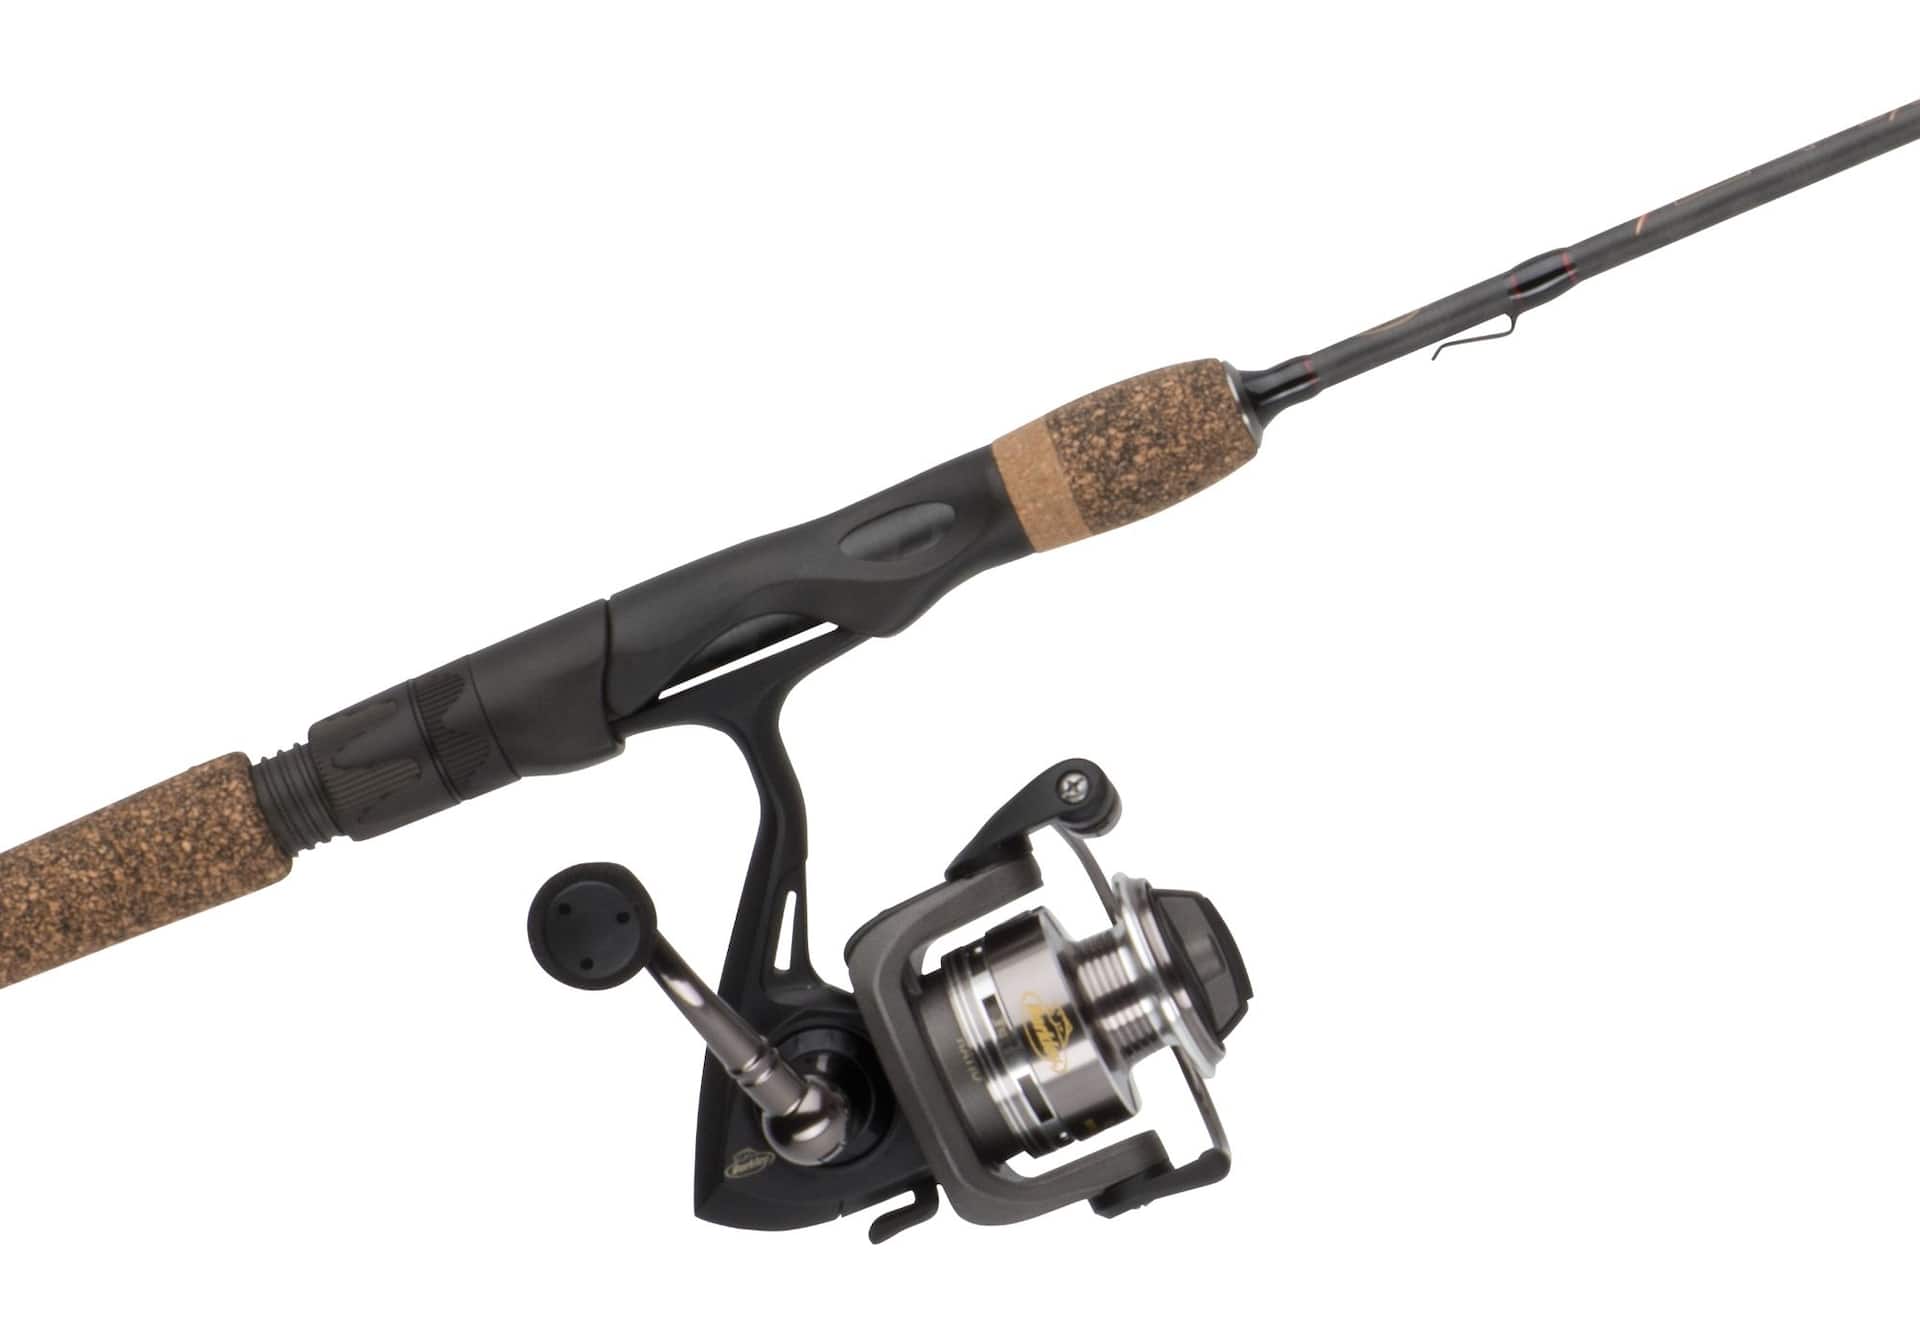 Berkley Big Game Spinning Fishing Rod and Reel Combo, Pre-Spooled, Medium- Heavy, 8-ft, 2-pc